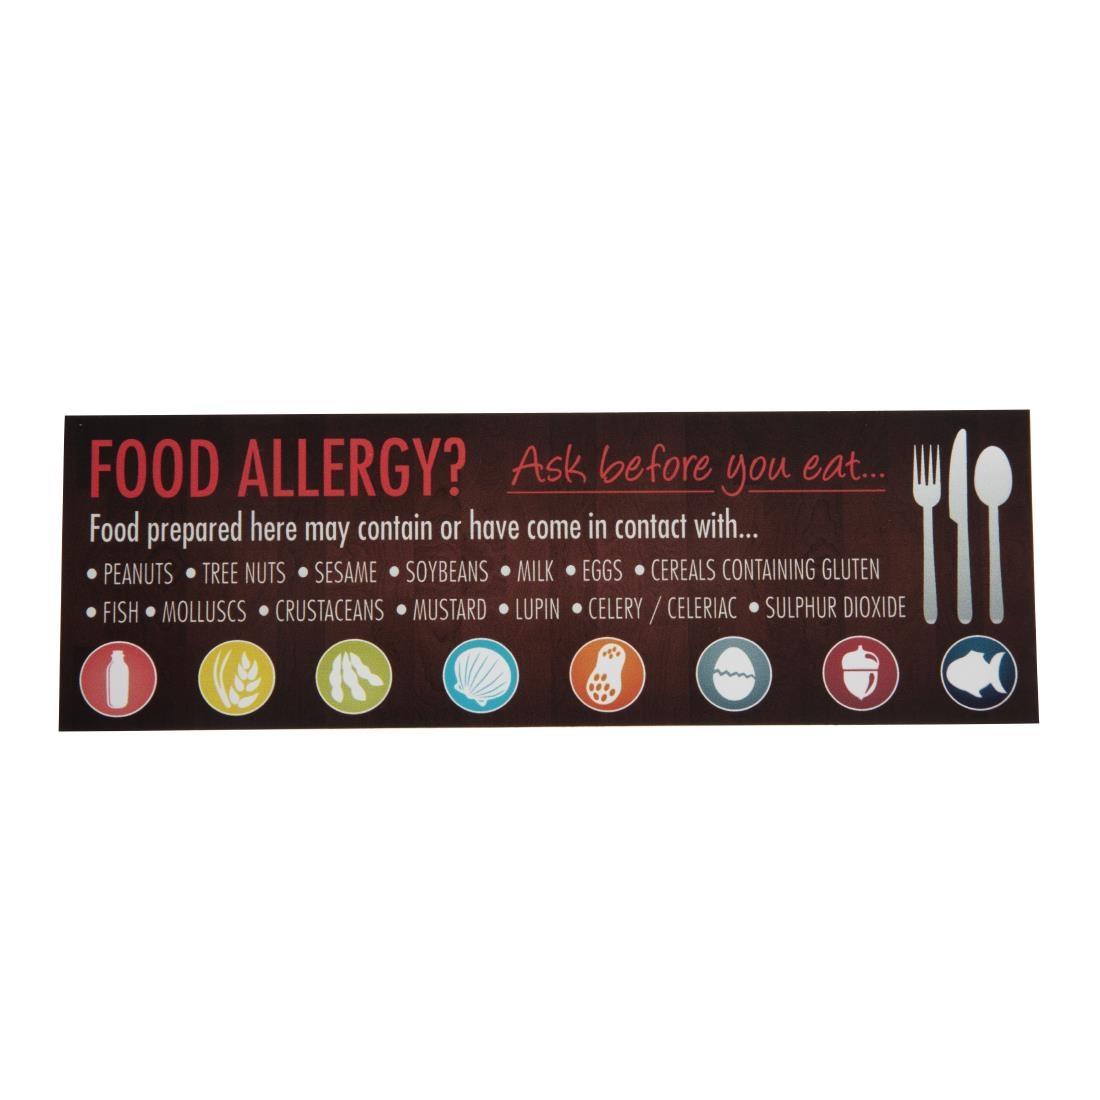 Food Allergen Window and Wall Stickers (Pack of 8) - GM818  - 7